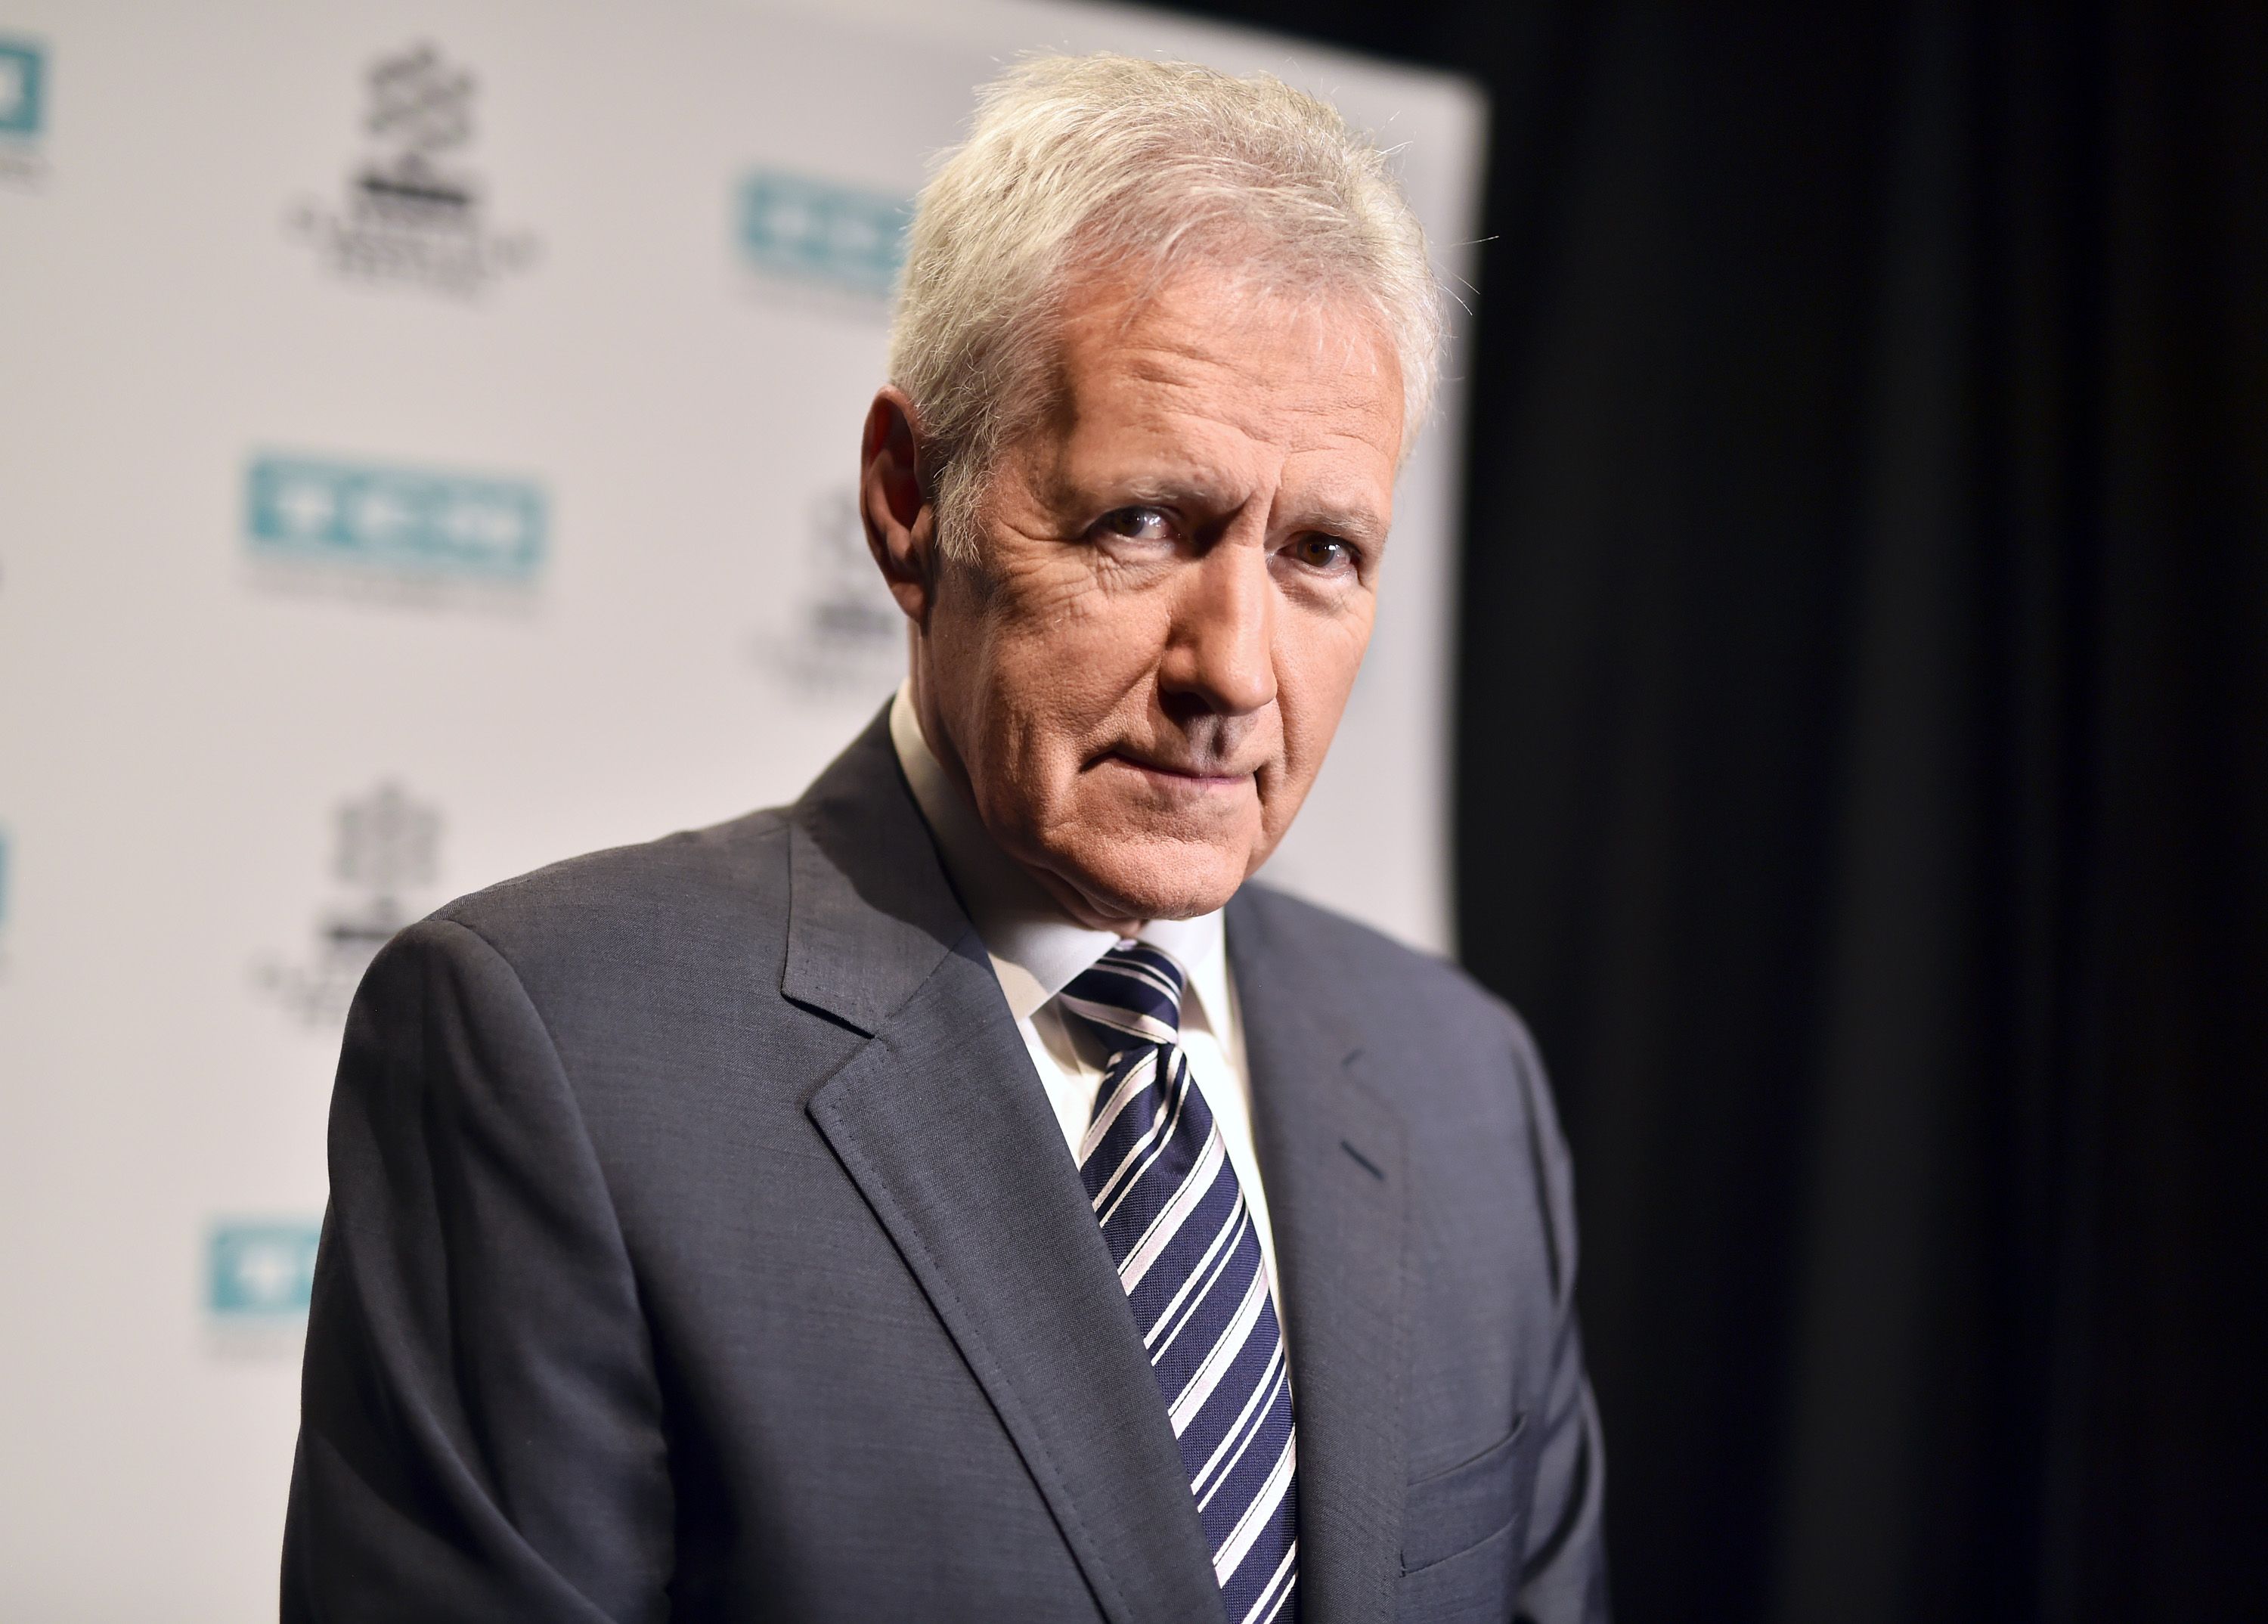 TV personality Alex Trebek at the screening of 'The Bridge on The River Kwai' during the 2017 TCM Classic Film Festival on April 7, 2017 | Photo: Getty Images